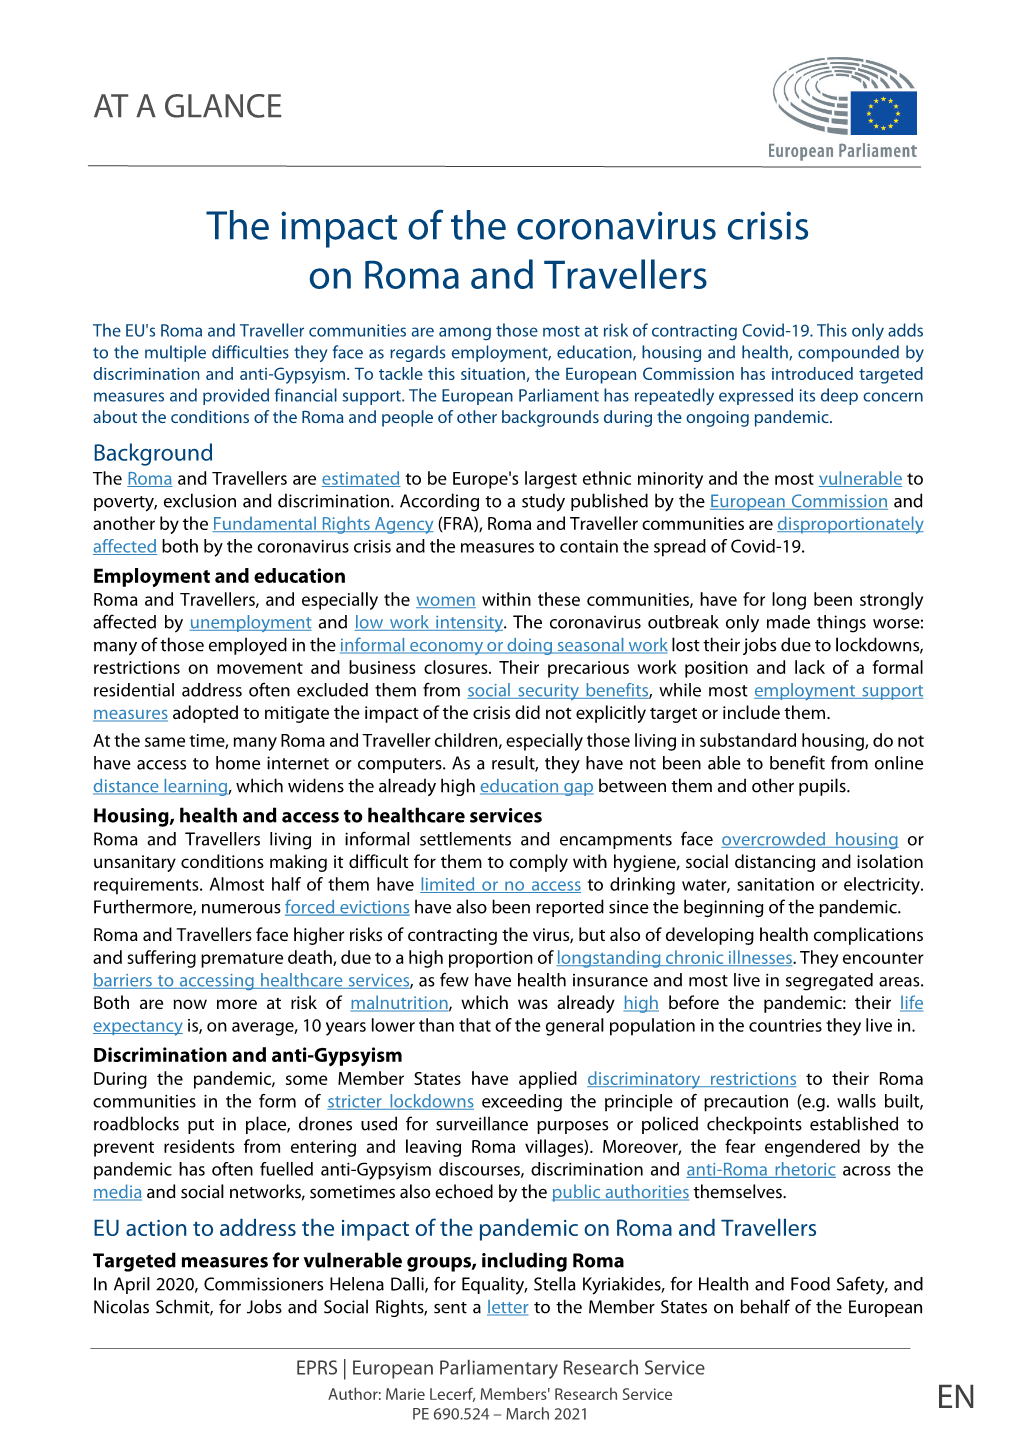 The Impact of the Coronavirus Crisis on Roma and Travellers